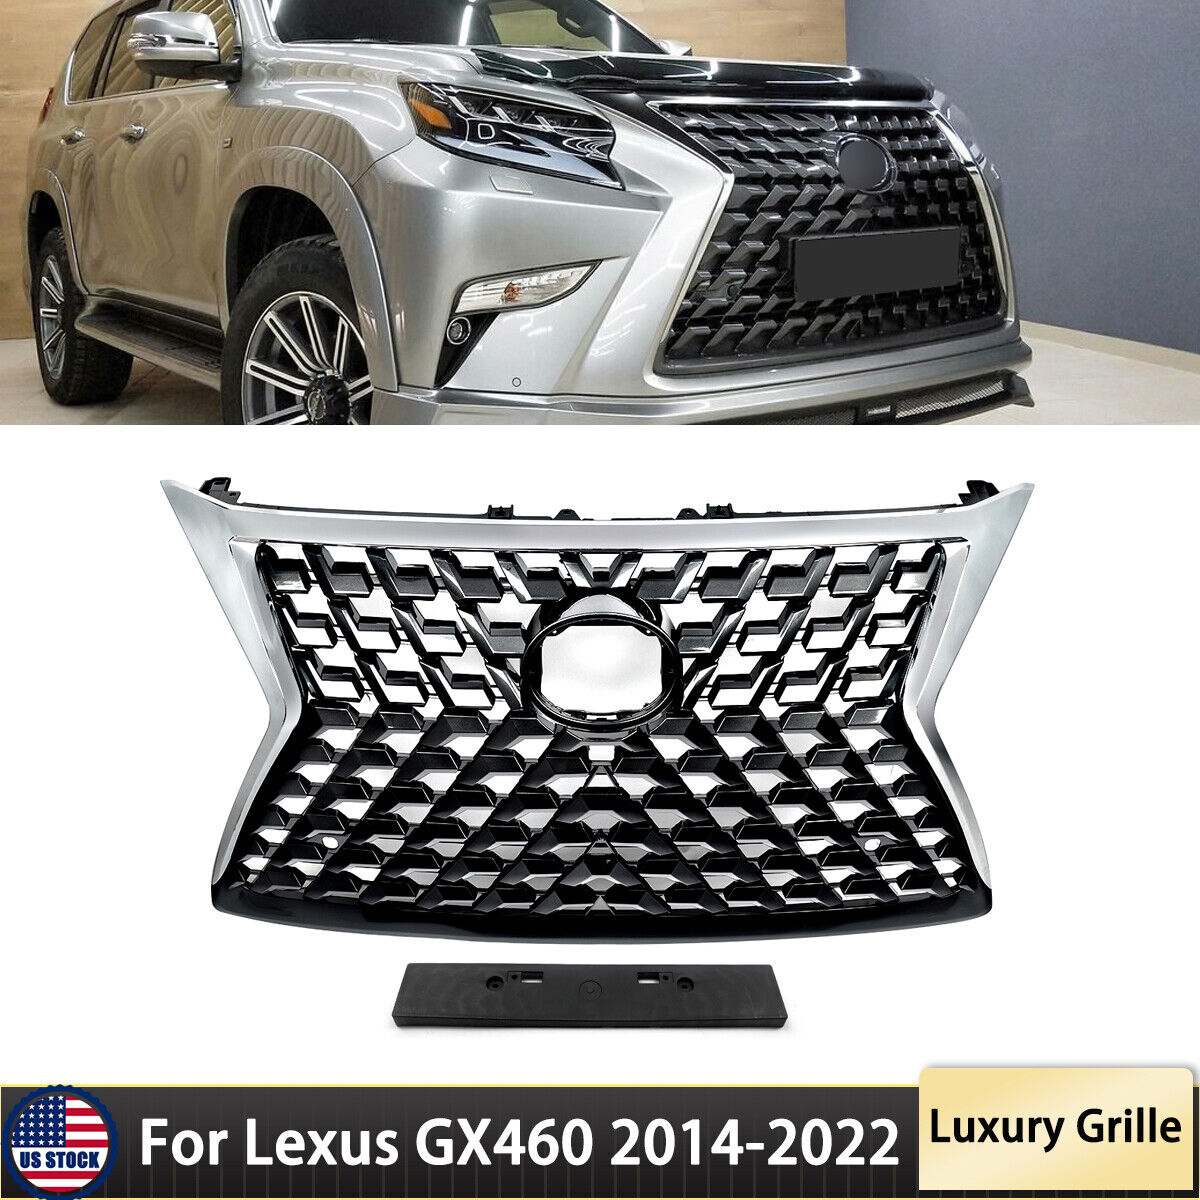 New Upgrade Luxury Grill For 2014-2022 LEXUS GX460 Front Grille Factory Style